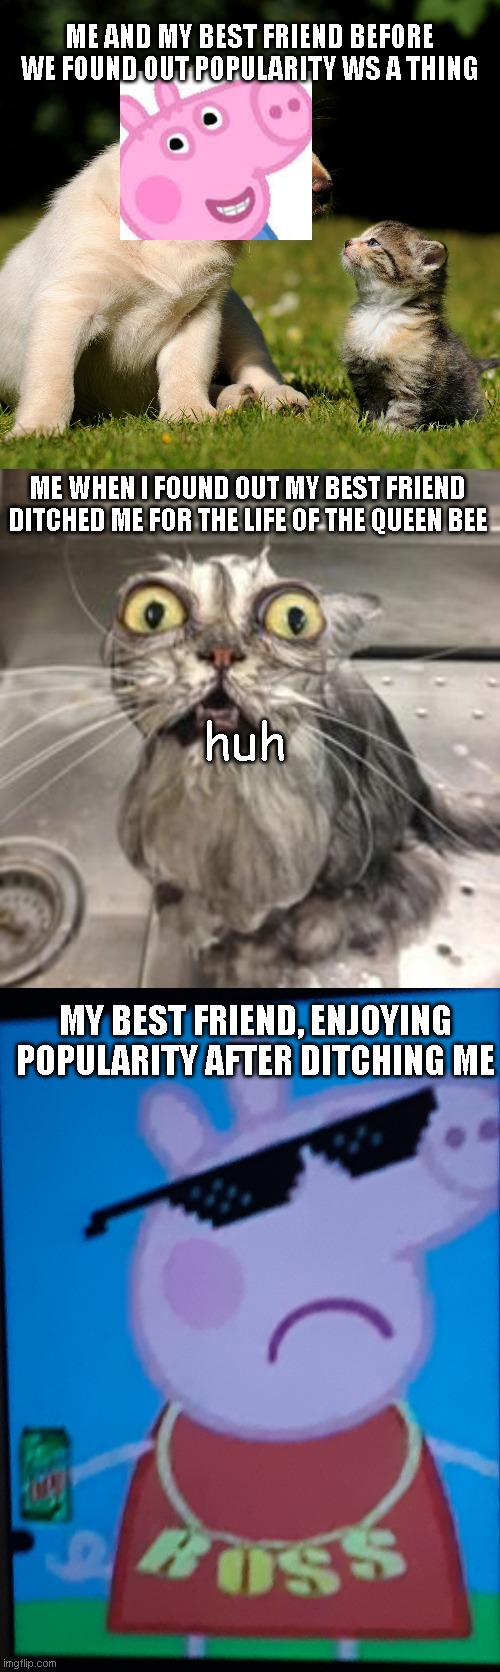 ME AND MY BEST FRIEND BEFORE WE FOUND OUT POPULARITY WS A THING; ME WHEN I FOUND OUT MY BEST FRIEND DITCHED ME FOR THE LIFE OF THE QUEEN BEE; huh; MY BEST FRIEND, ENJOYING POPULARITY AFTER DITCHING ME | image tagged in me and you is friends - fb,cat bath,peppa pig with da homies | made w/ Imgflip meme maker